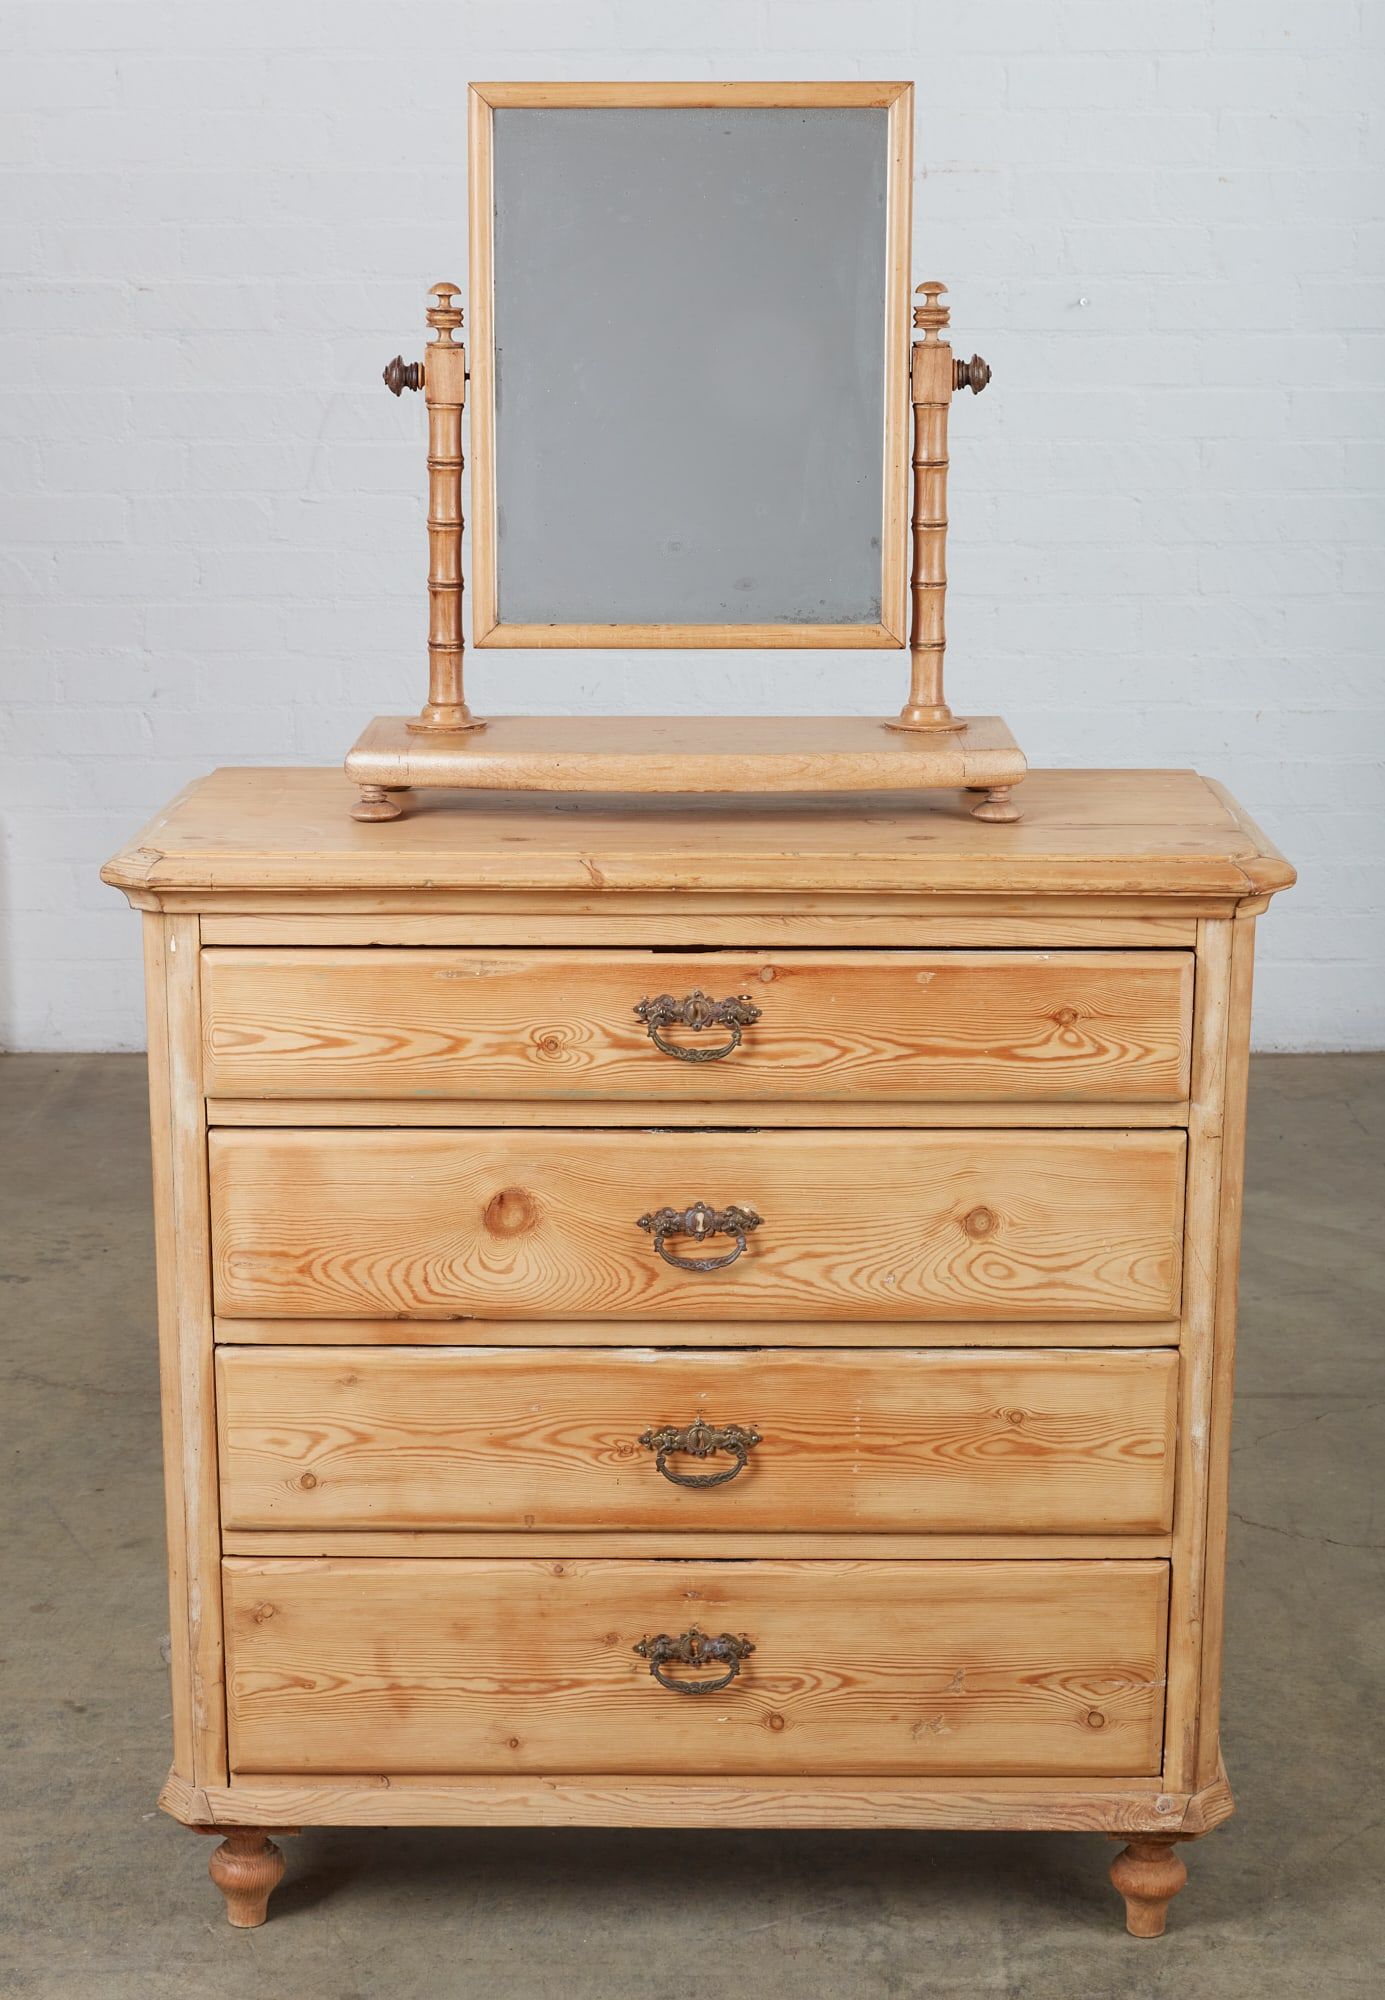 AN AMERICAN PINE CHEST OF DRAWERS,